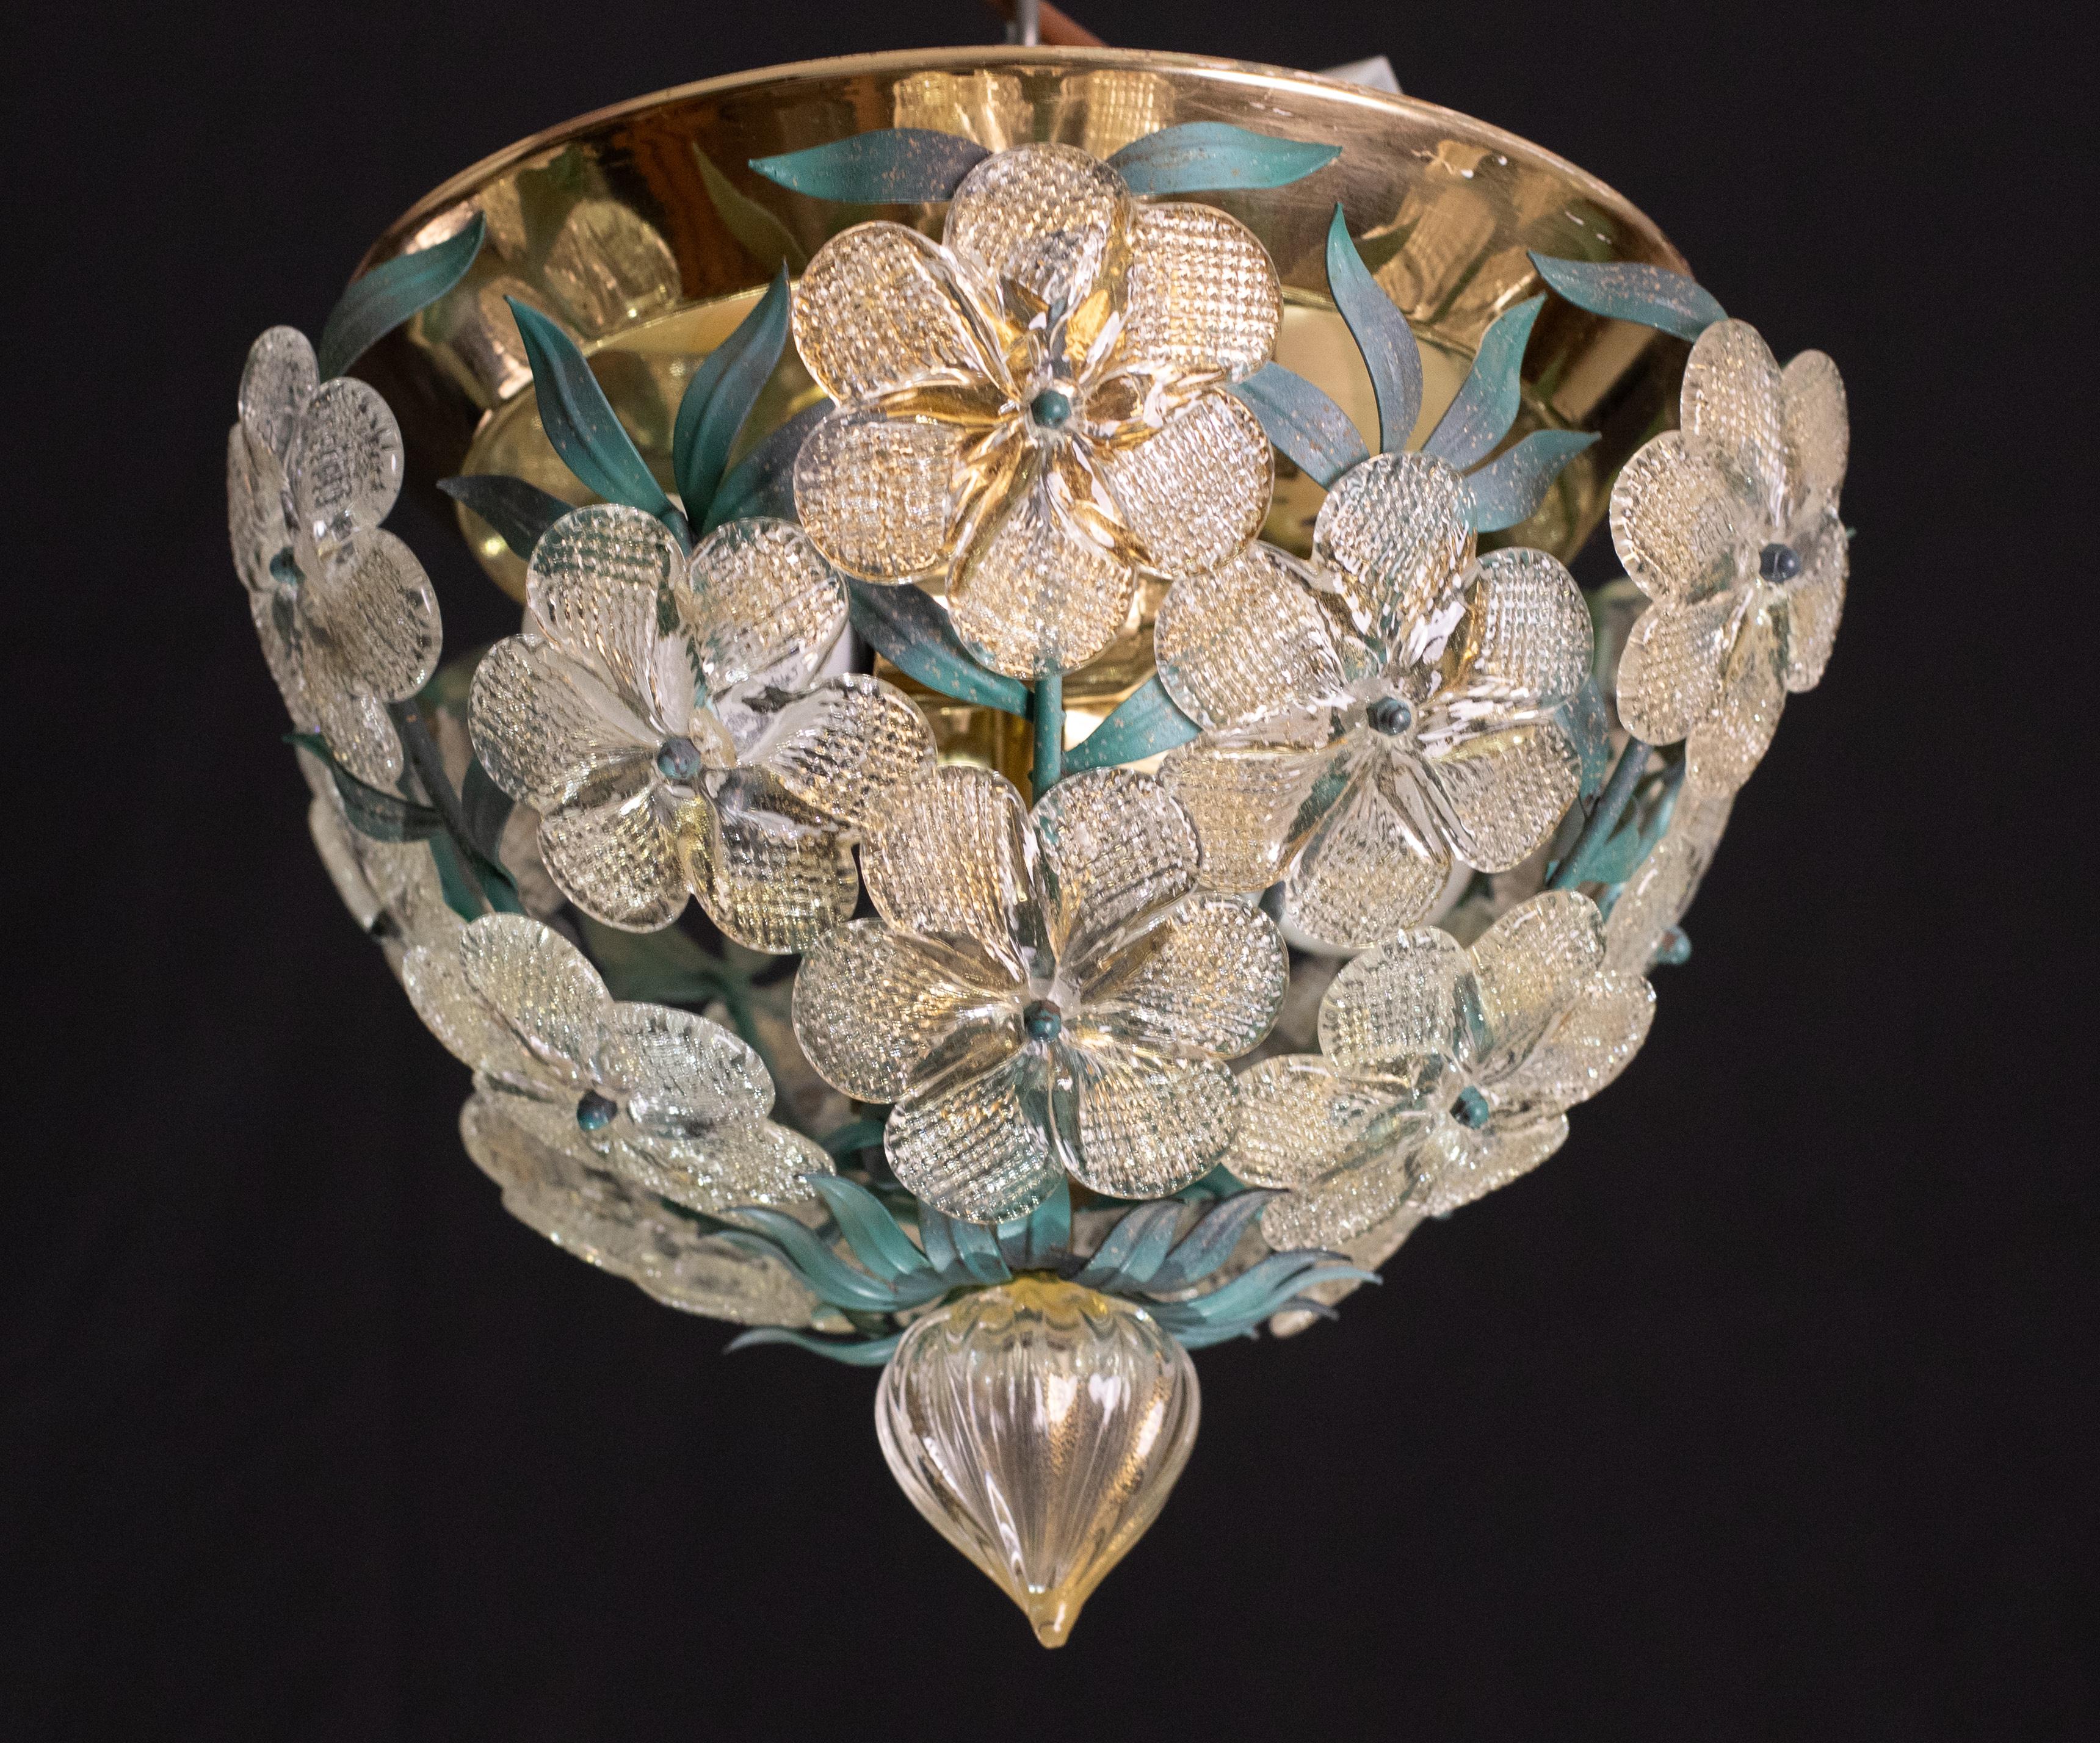 Pretty set of 2 two-light ceiling lamp with Murano glass flowers, made by Seguso for Venini, Italy, 1960s.
Metal ceiling basket with overlapping flowers theme in hand-blown Murano glass in gold and transparent color with gold inclusions,